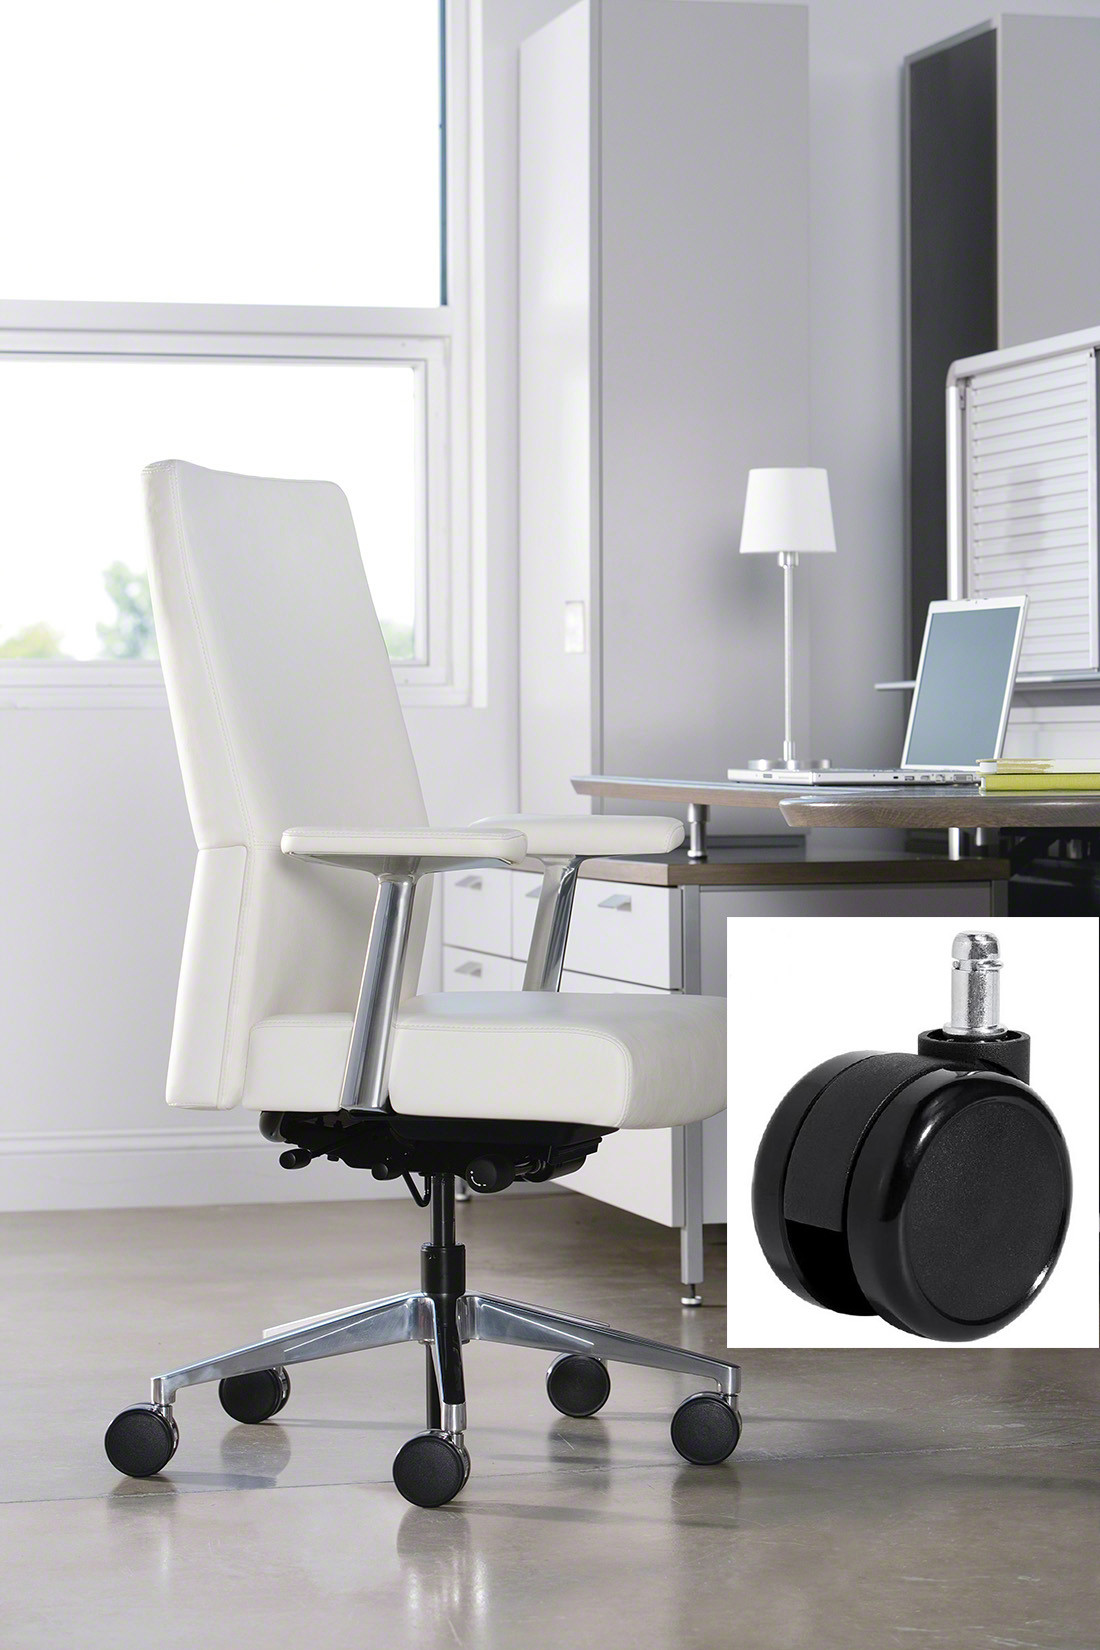 where to purchase office steelcase casters chair components